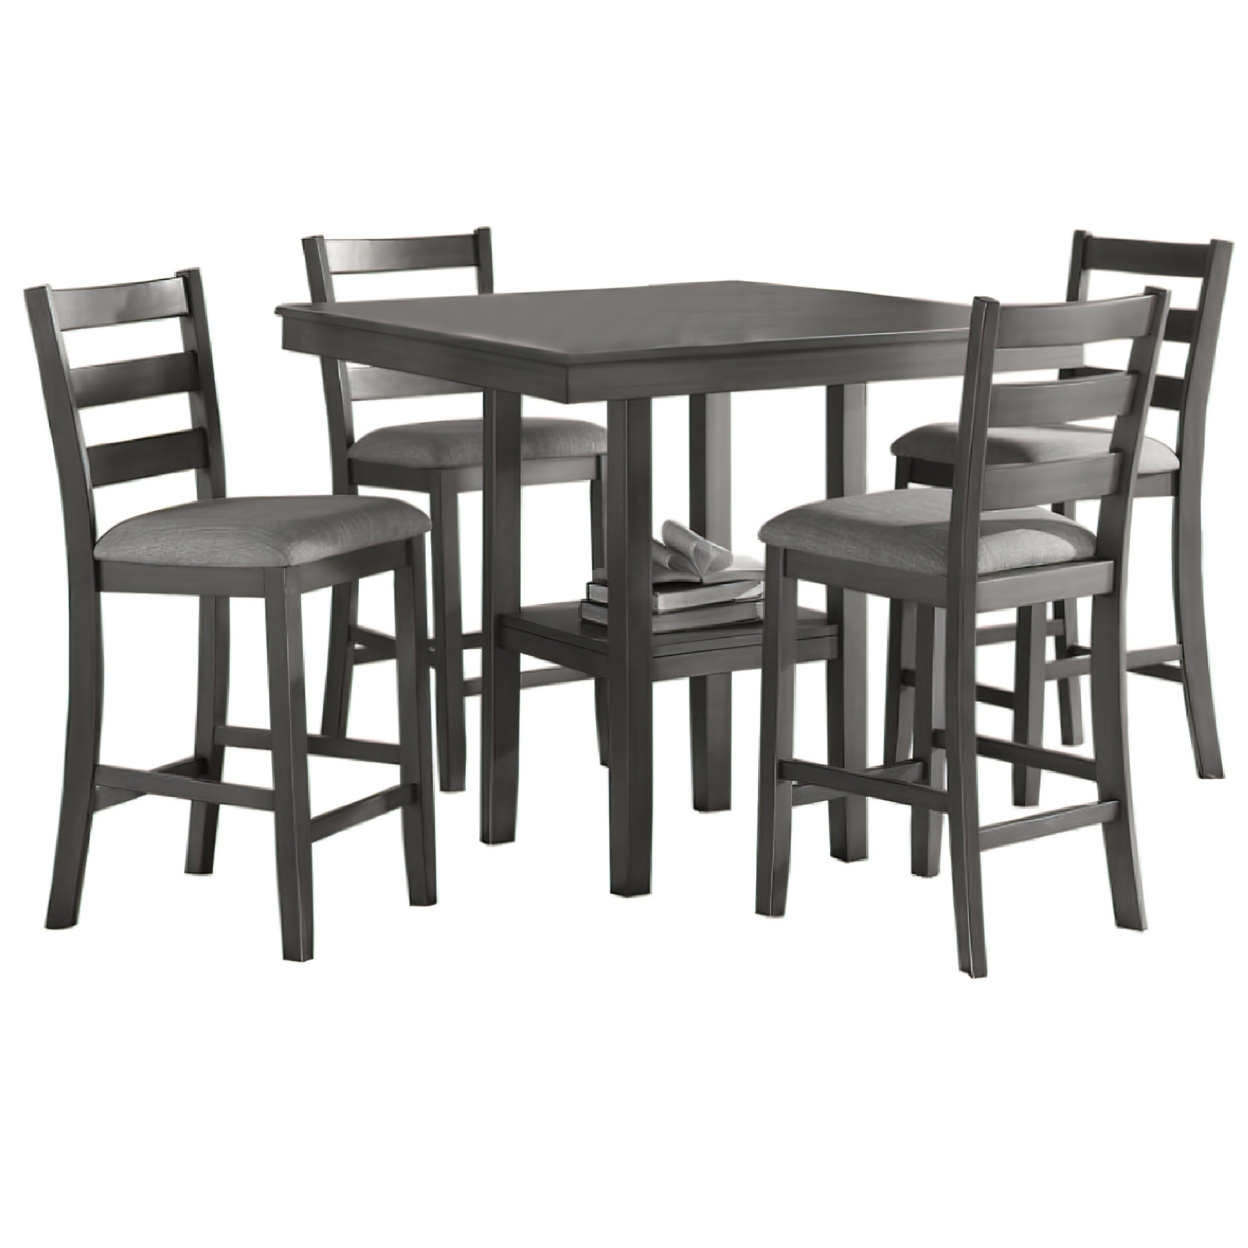 5 Piece Counter Height Dining Set, Table And 4 Chairs, Padded Seats, Gray- Saltoro Sherpi